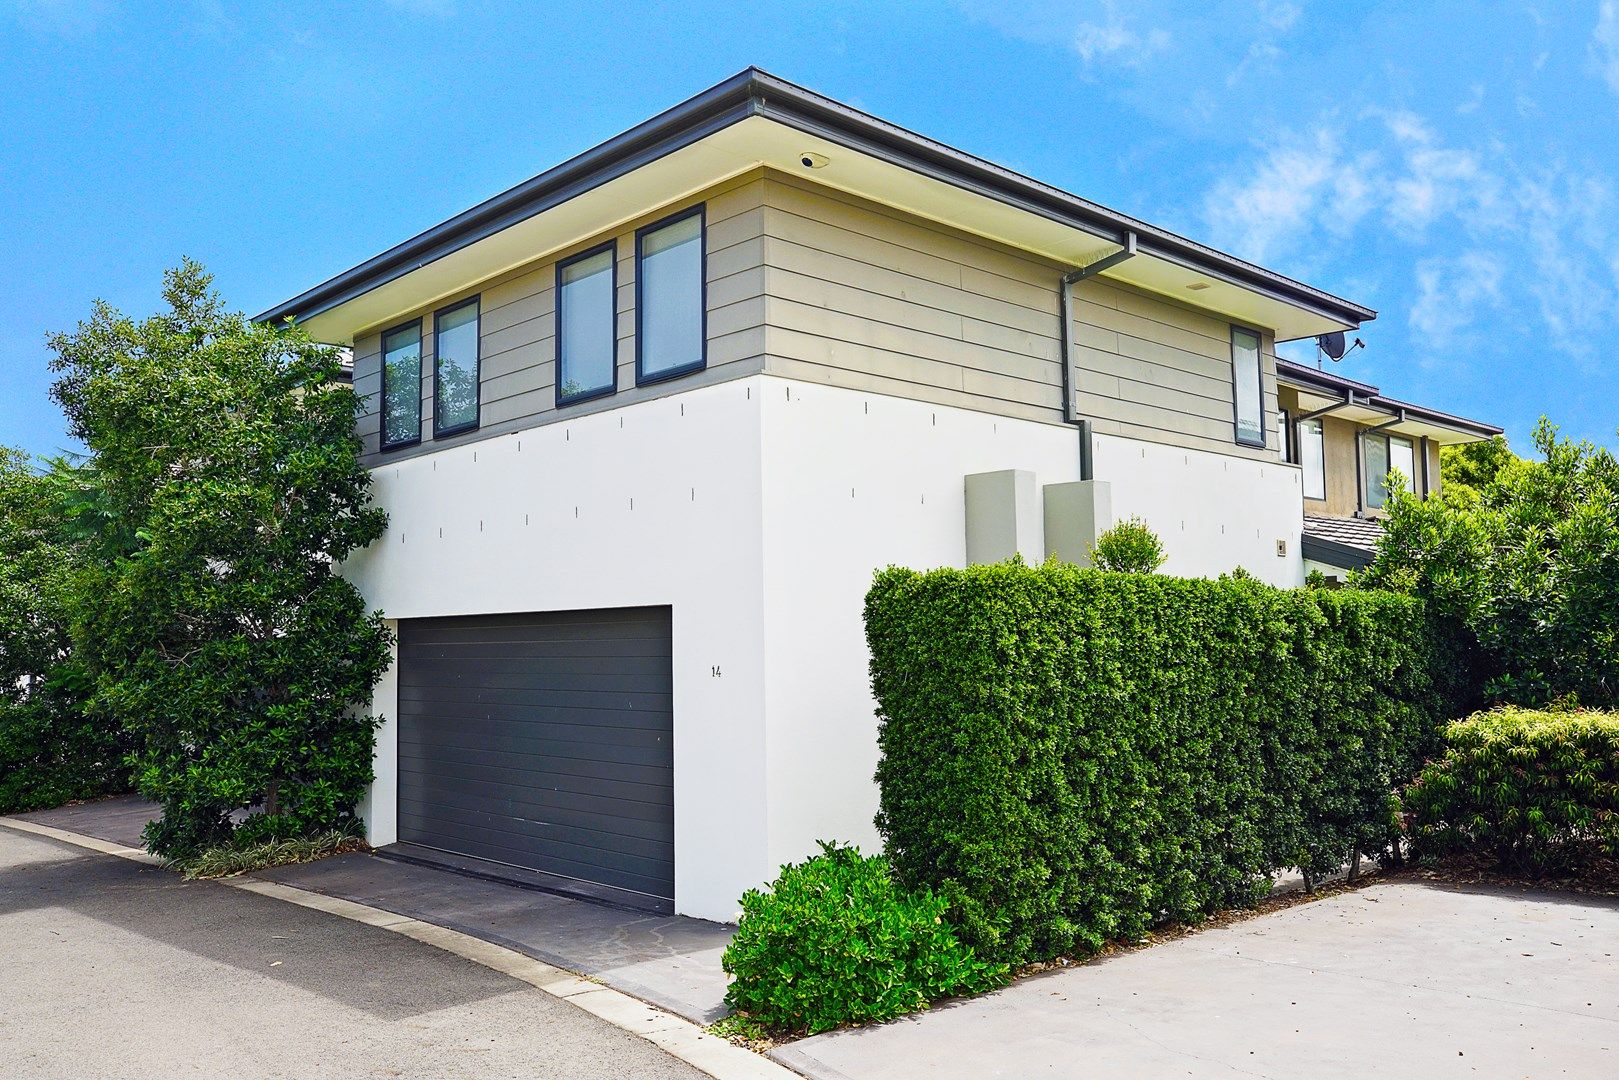 14/47 Camellia Ave, Glenmore Park NSW 2745, Image 0